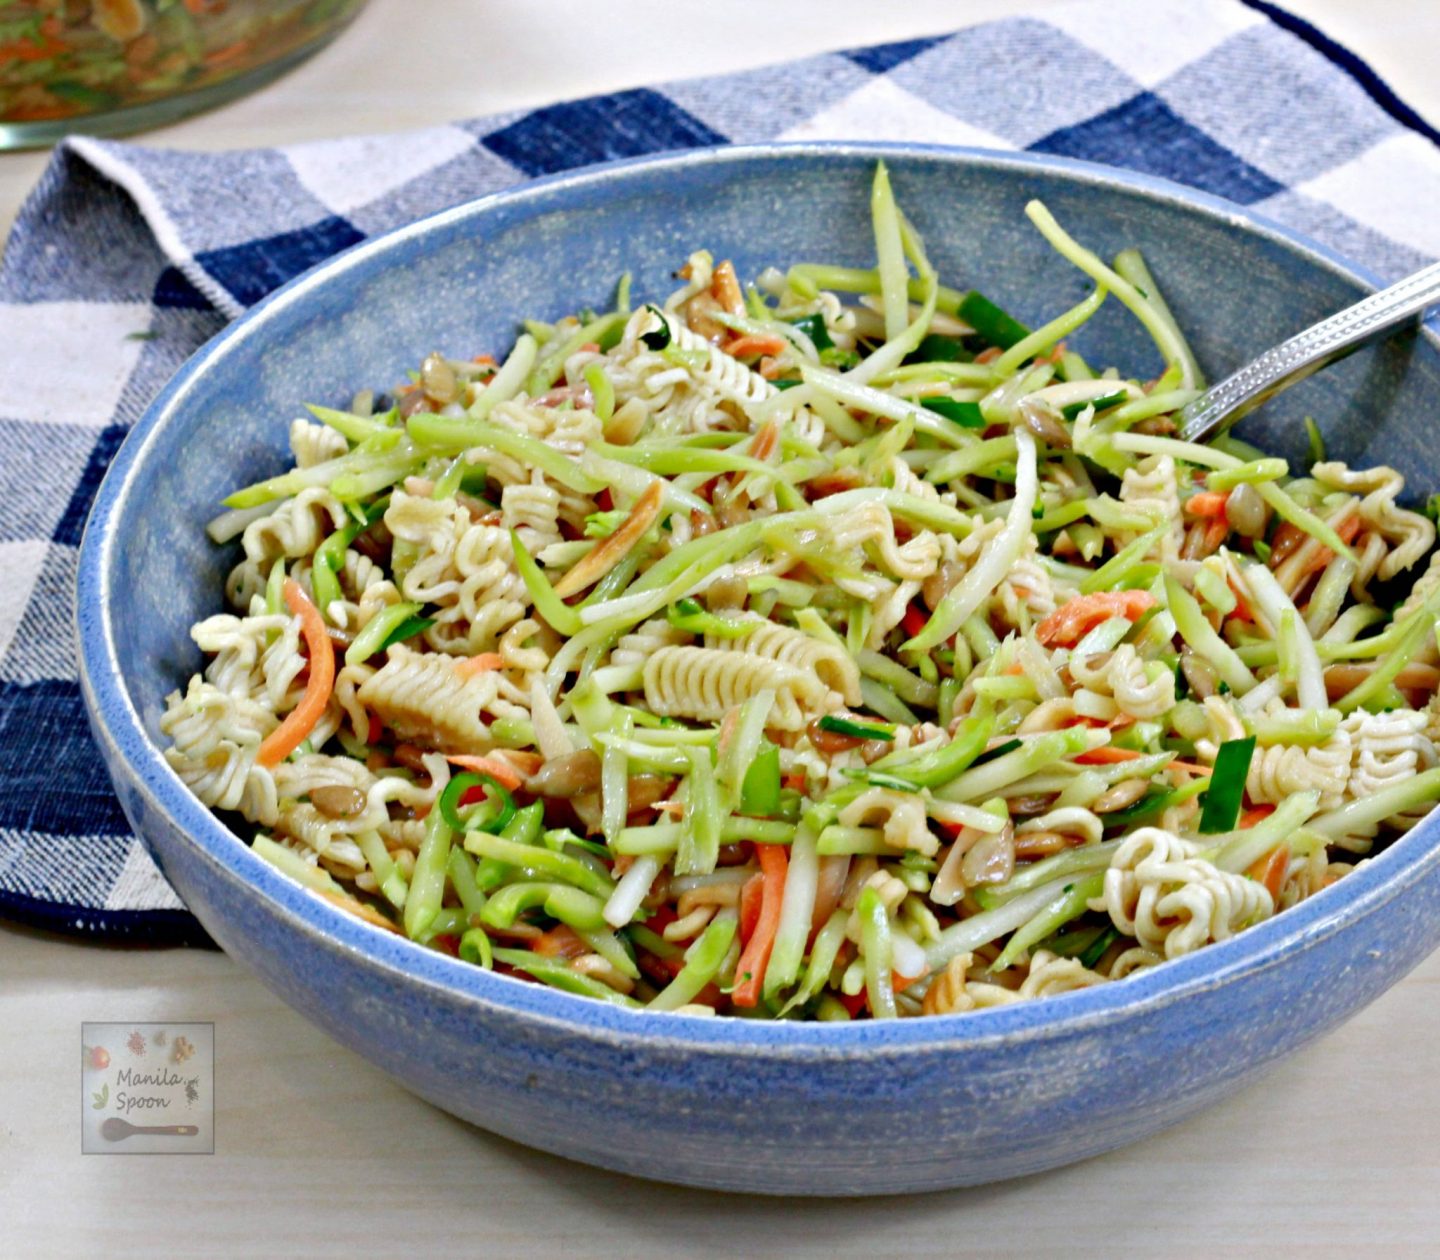 Comes together in 10 minutes or less, this Asian Ramen Broccoli Coleslaw is tasty, crunchy and pretty healthy, too. The perfect side for picnics, potlucks or any gatherings! #asian #ramen #broccoli #coleslaw